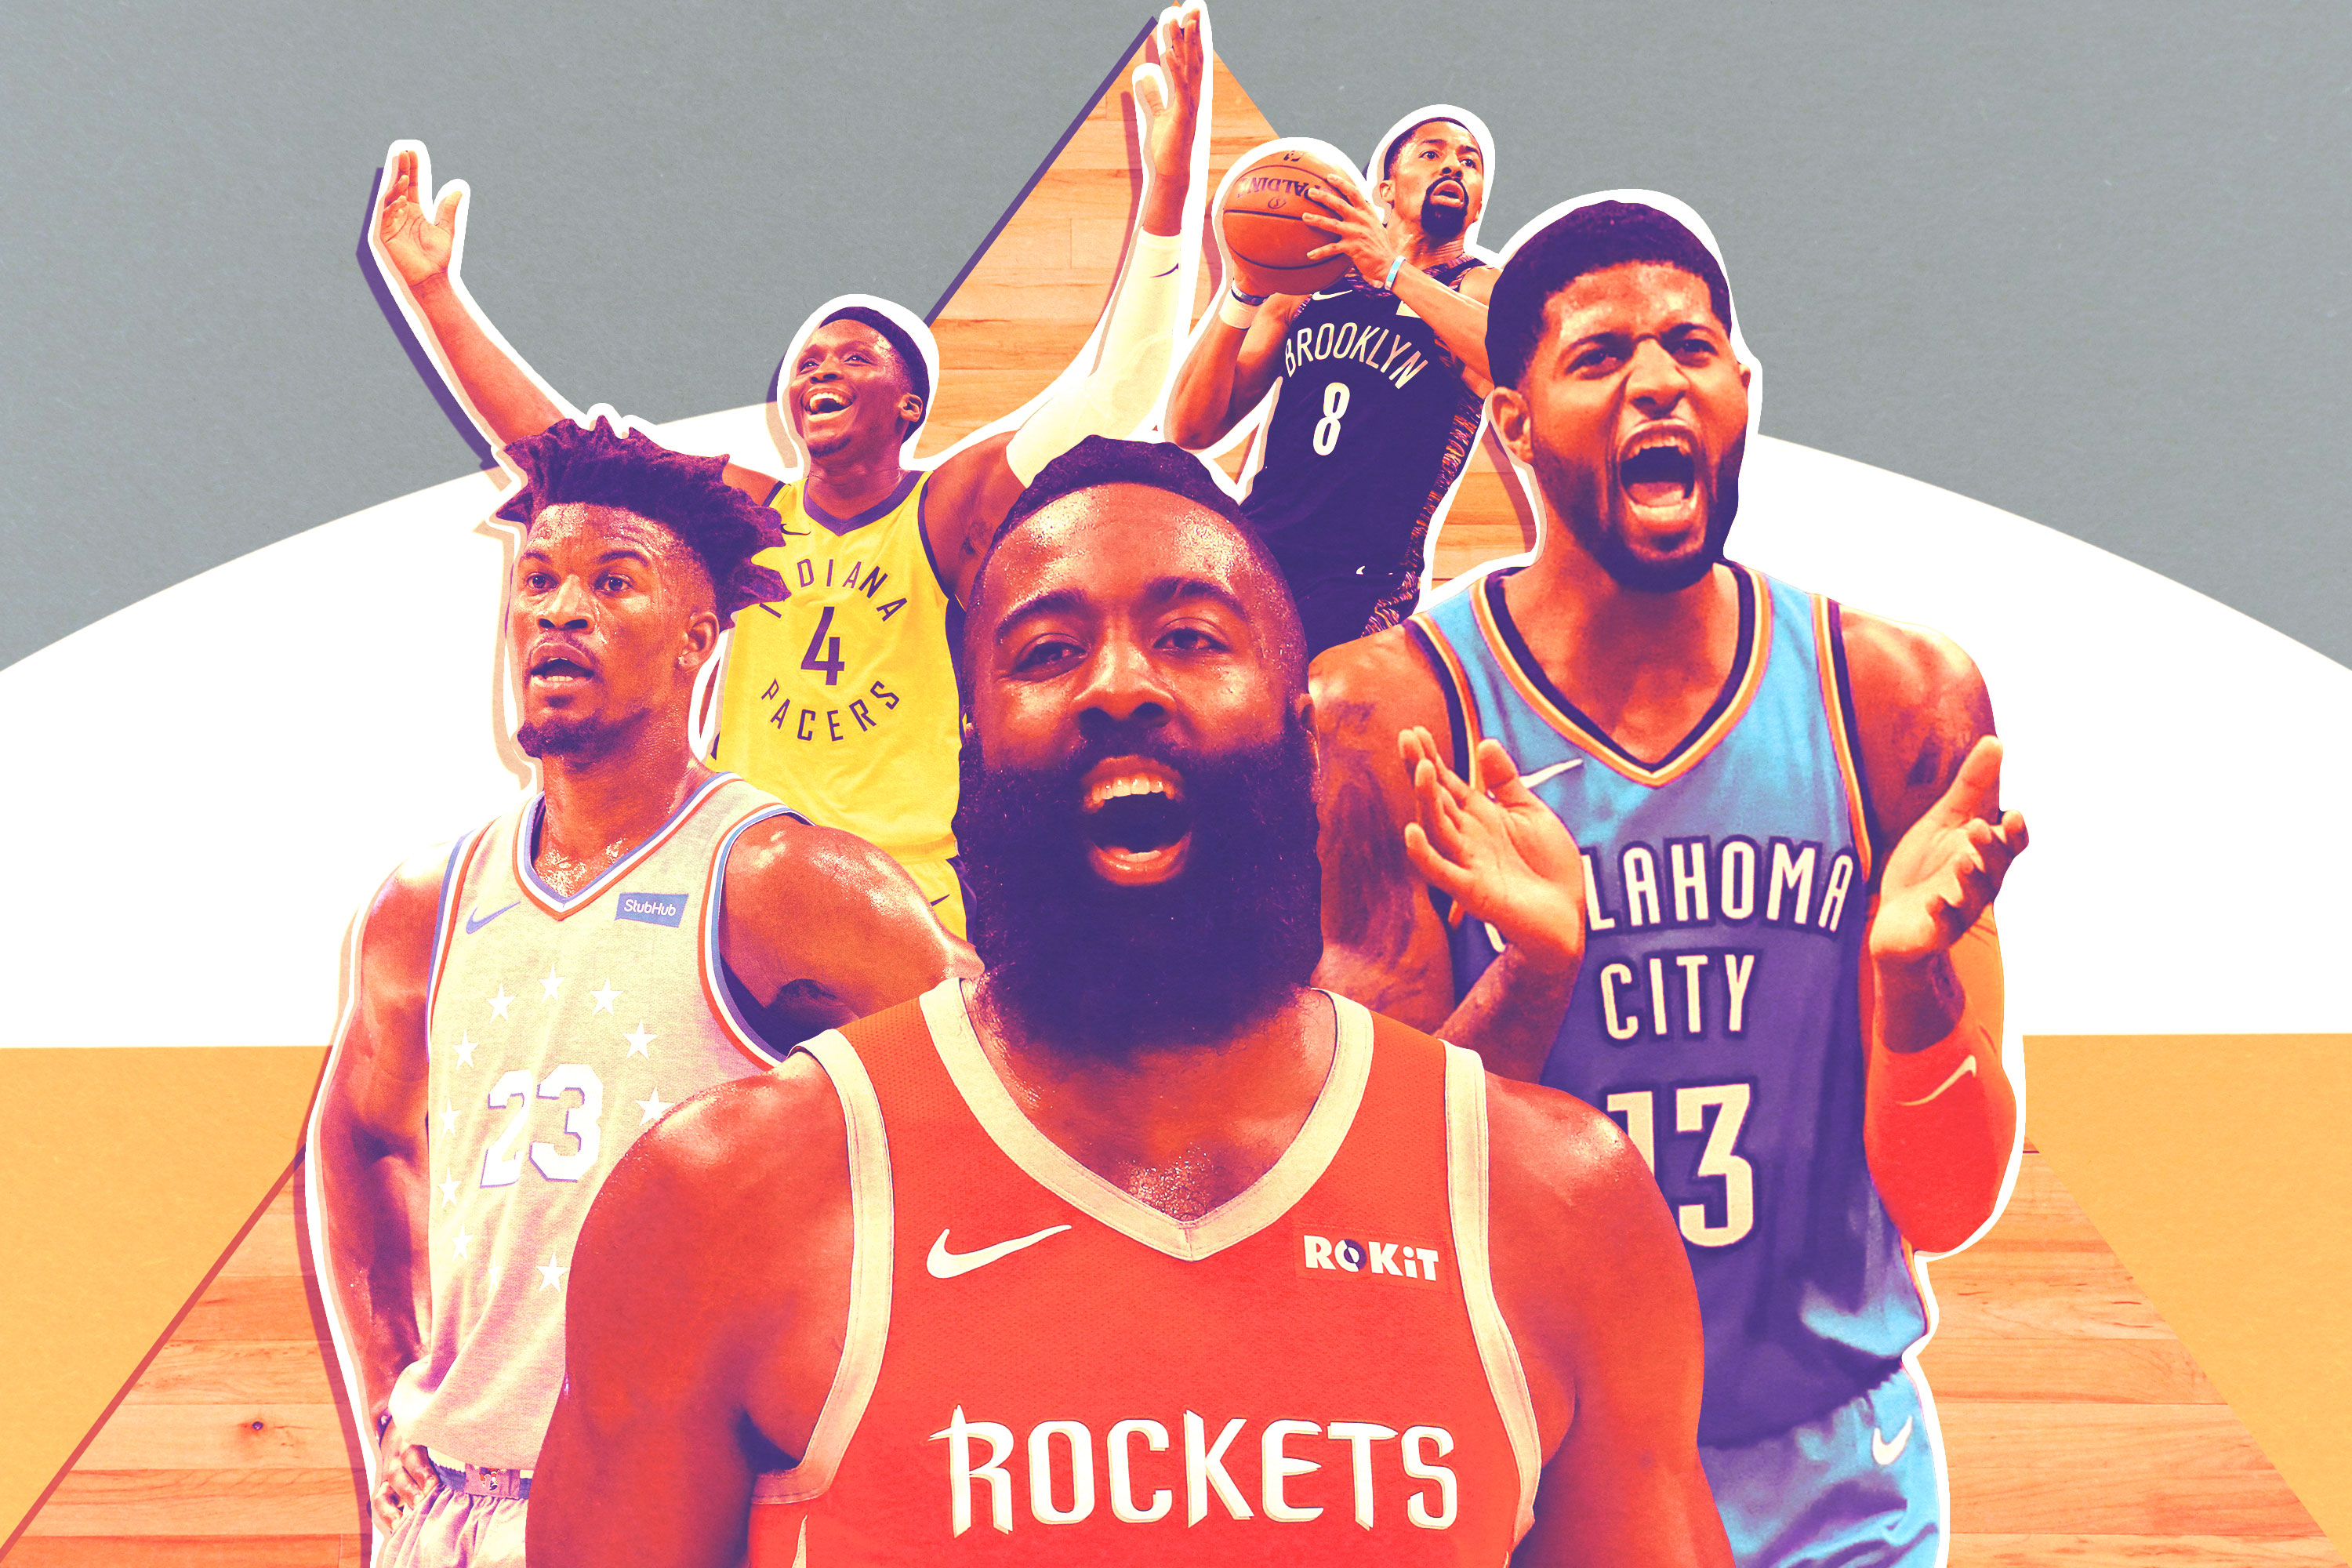 Jimmy Butler, Victor Oladipo, James Harden, Paul George, and Spencer Dinwiddie